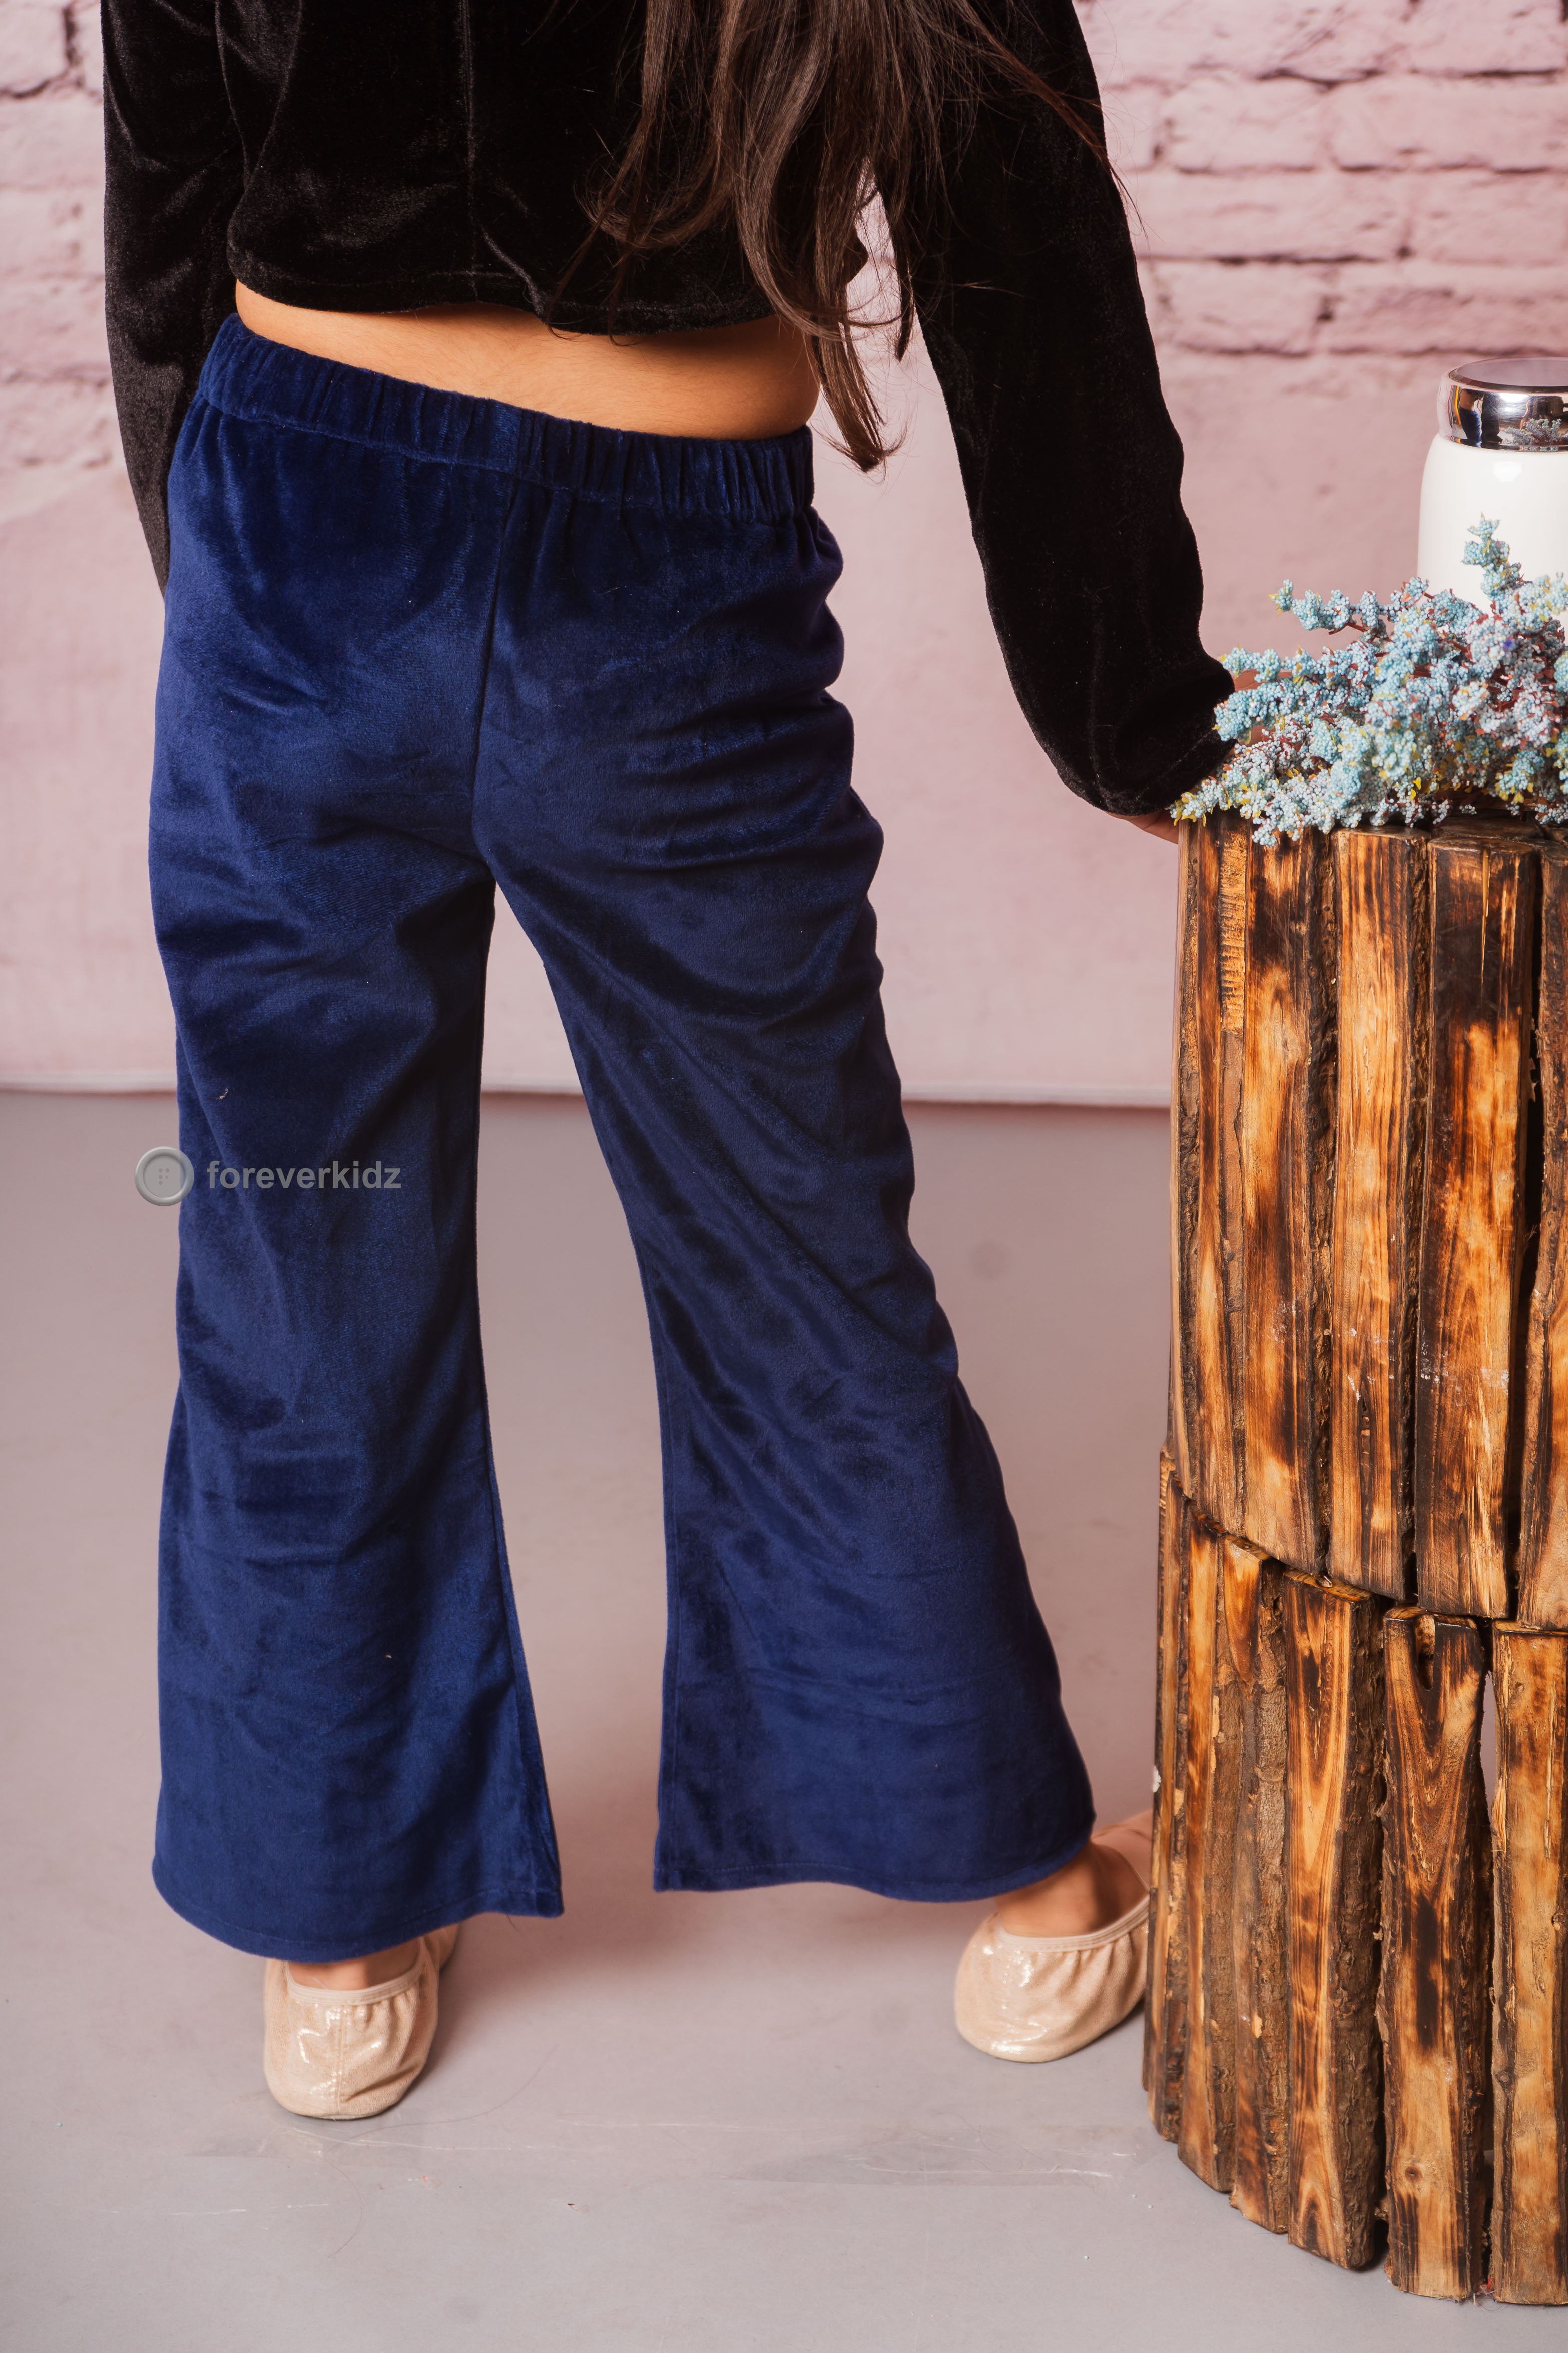 Plus Size Velvet Flare Pants For Women Elegant Wide Leg Trouser For Fall  And Winter Casual Designer Wide Leg Trousers Outfit Style #230325 From  Cong02, $22.28 | DHgate.Com